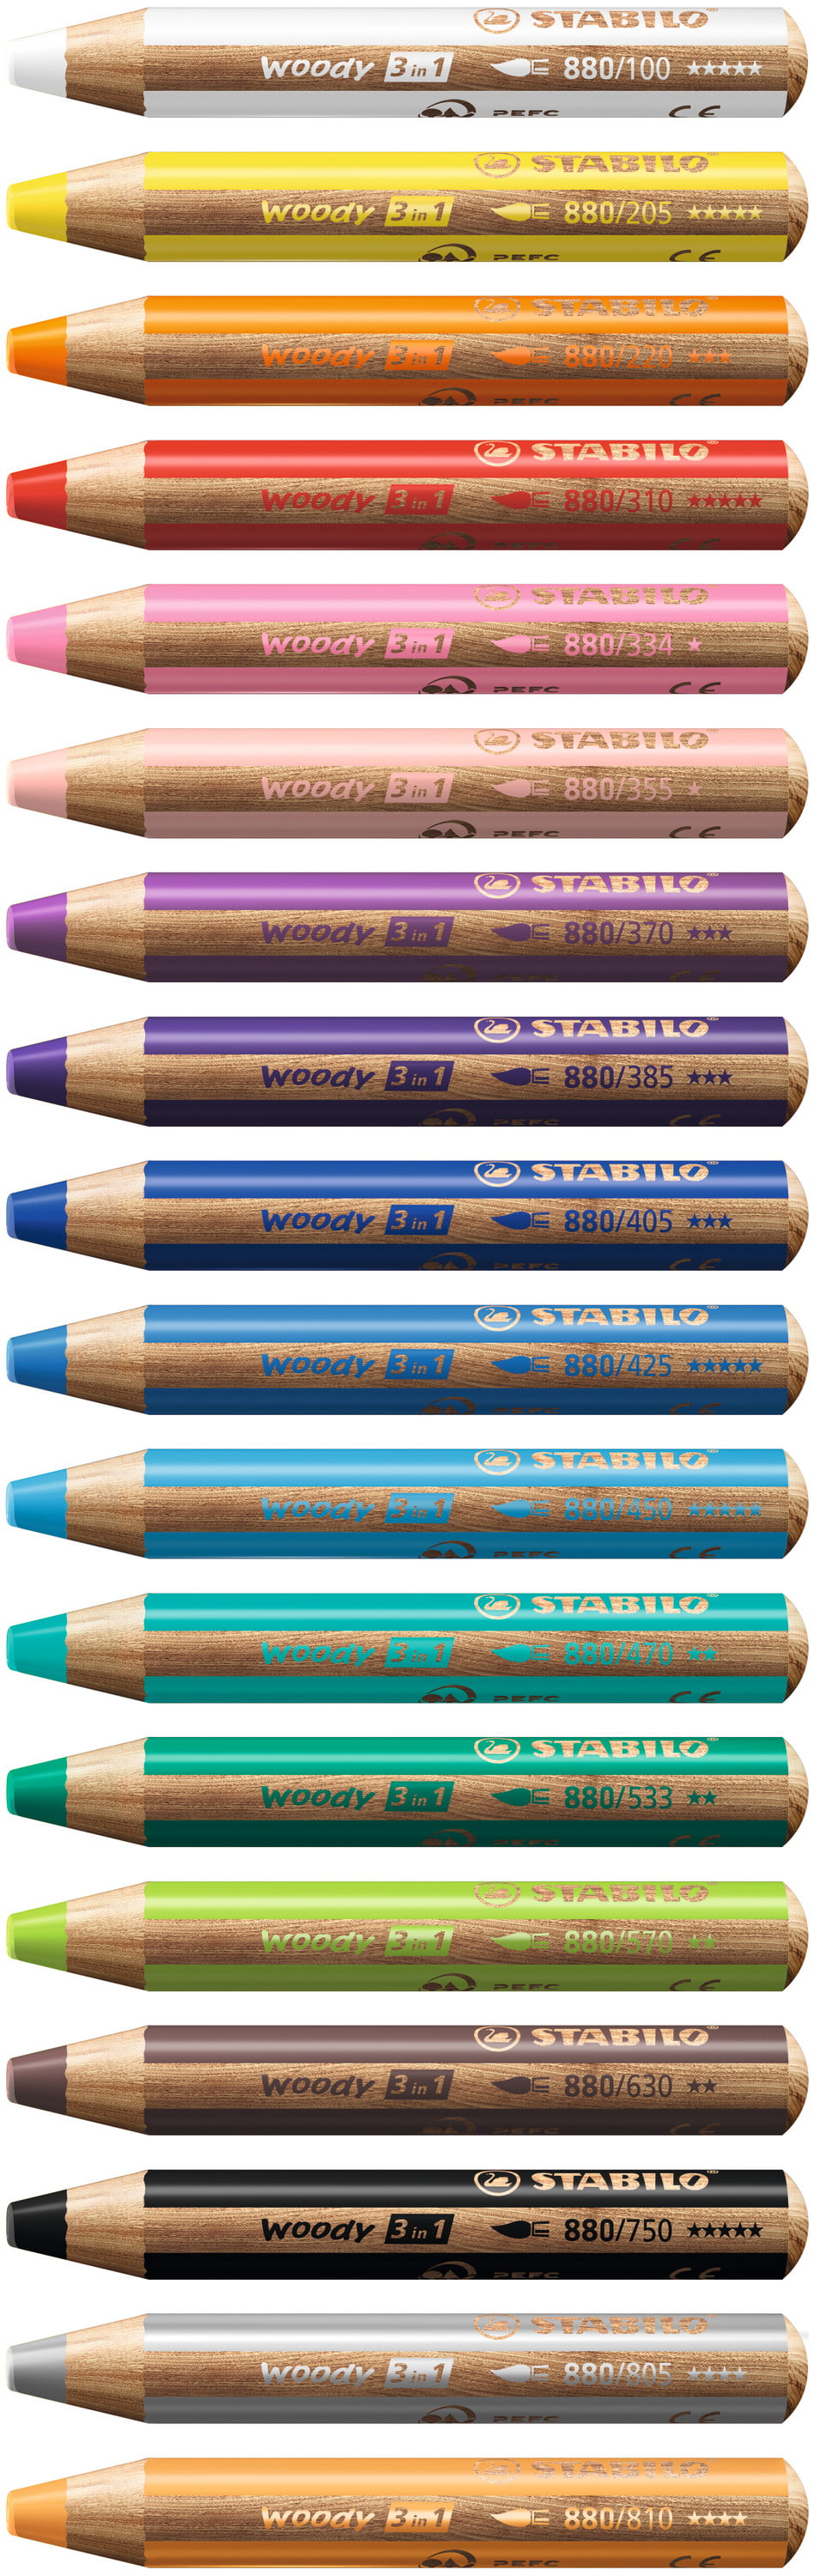 STABILO Woody 3 in 1, Set of 18 with Sharpener